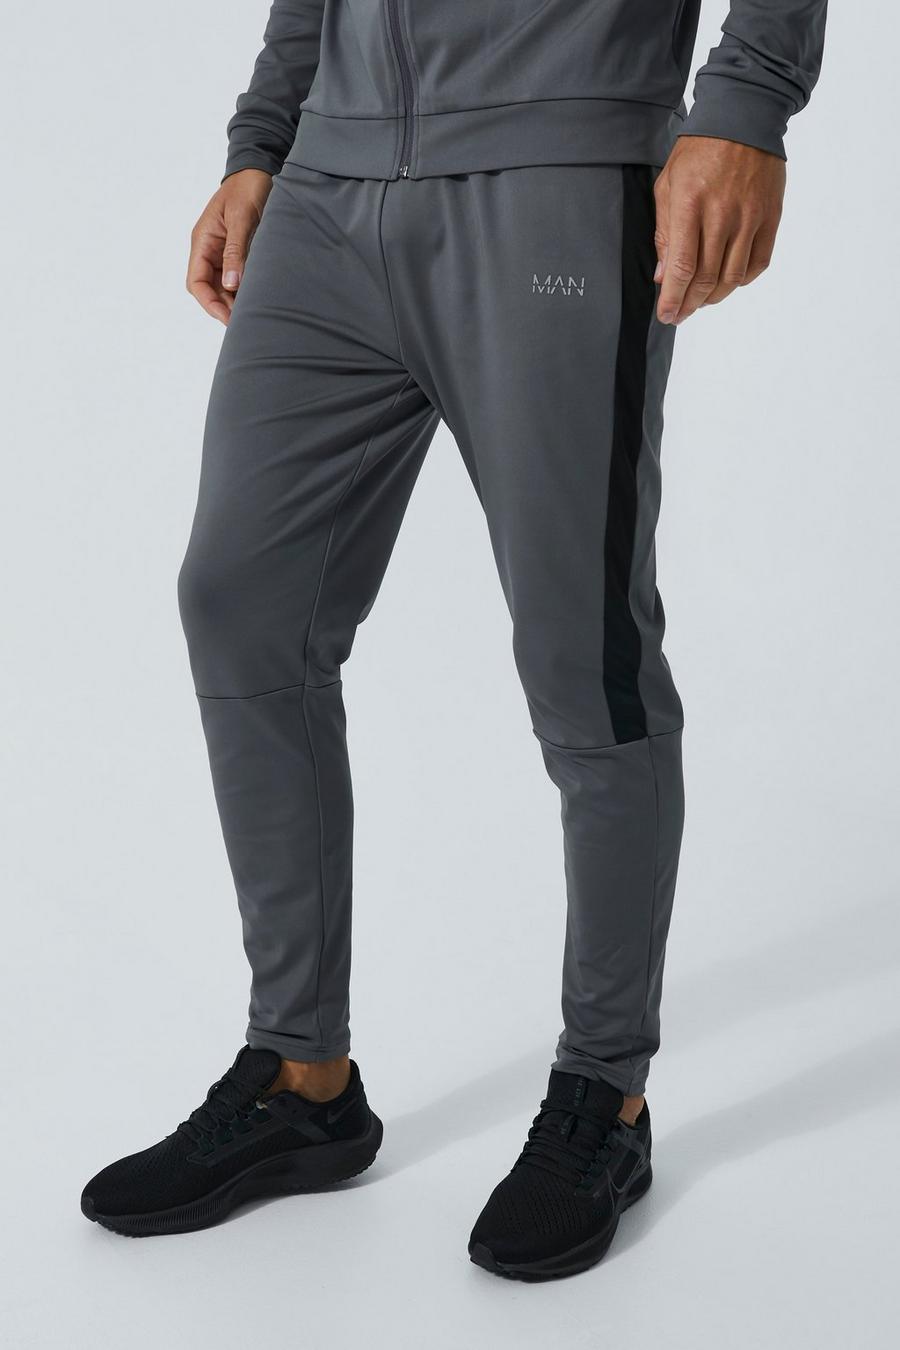 Charcoal gris Tall Man Active Performance Training Joggers